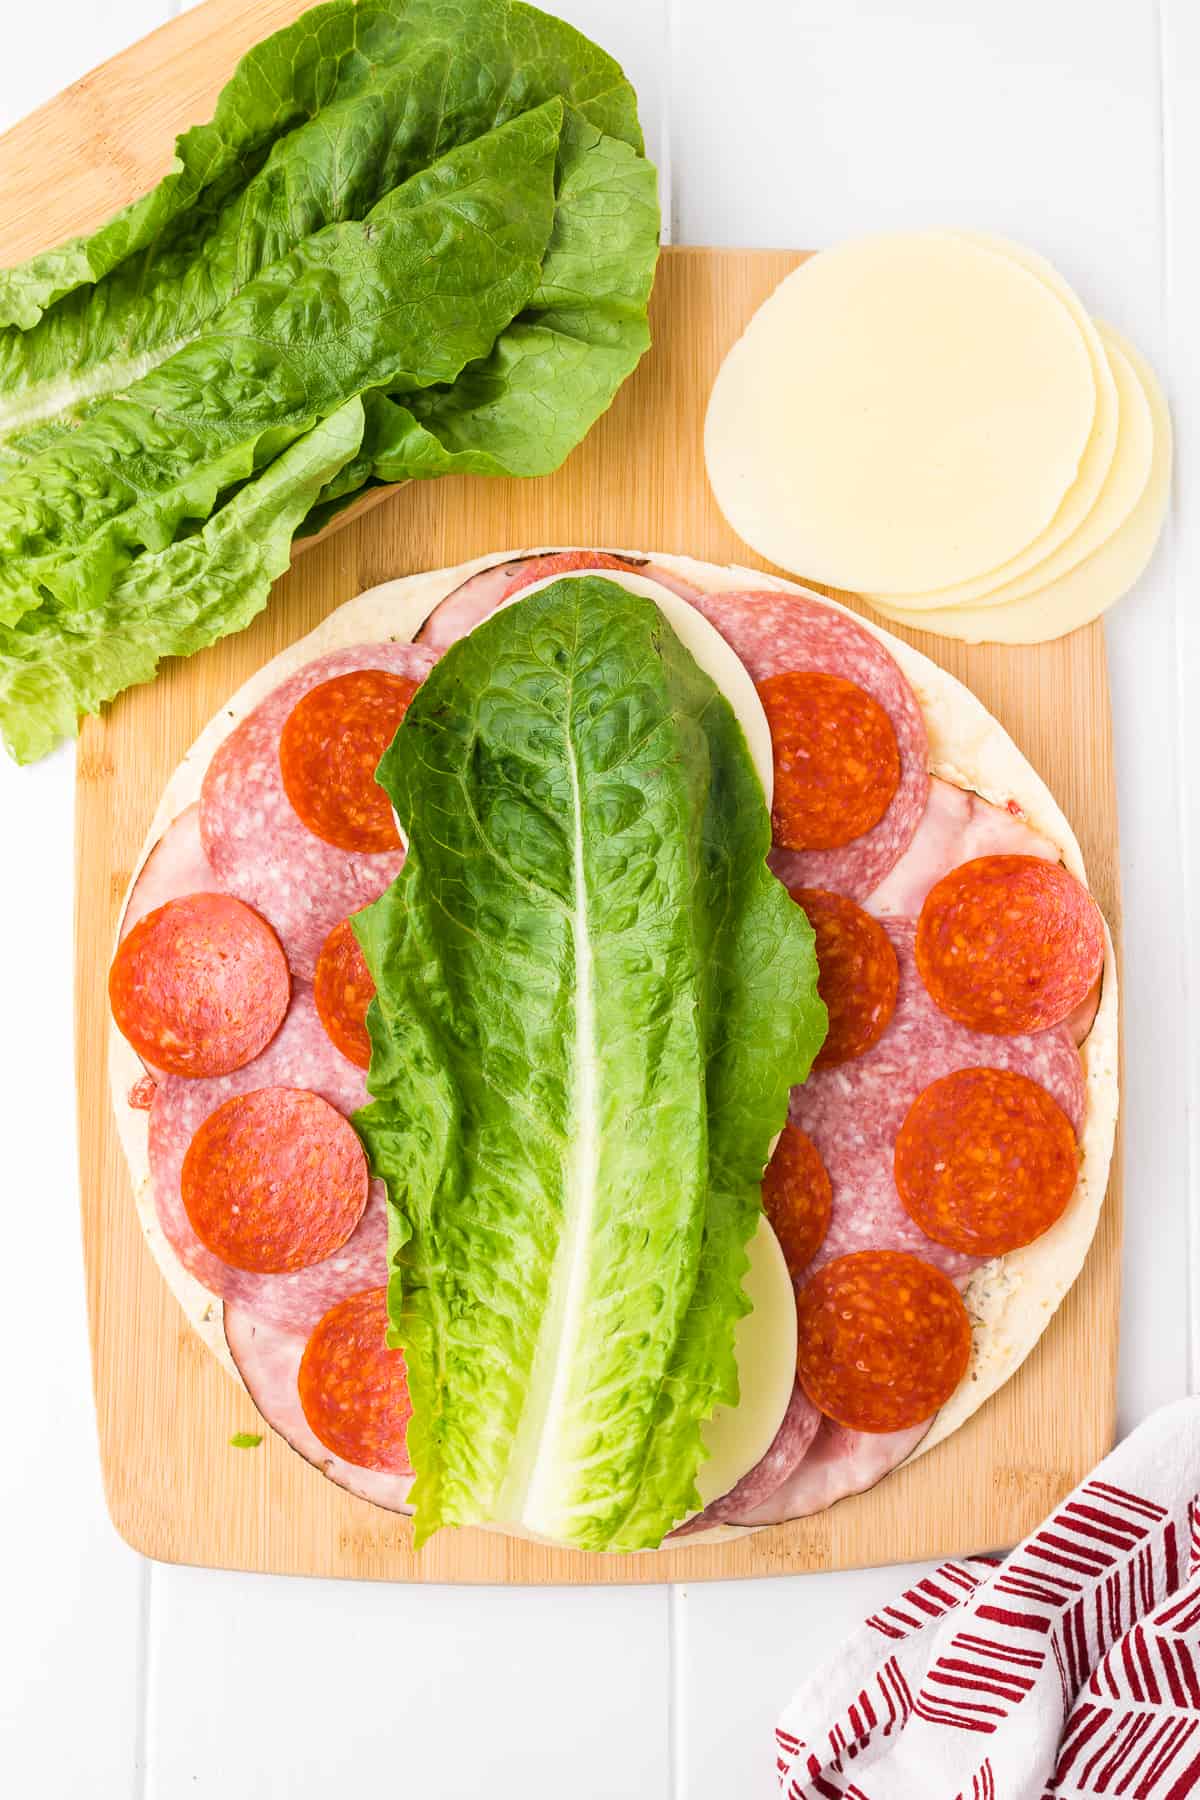 Adding lettuce to the top of a tortilla covered in Italian meats and cheese.